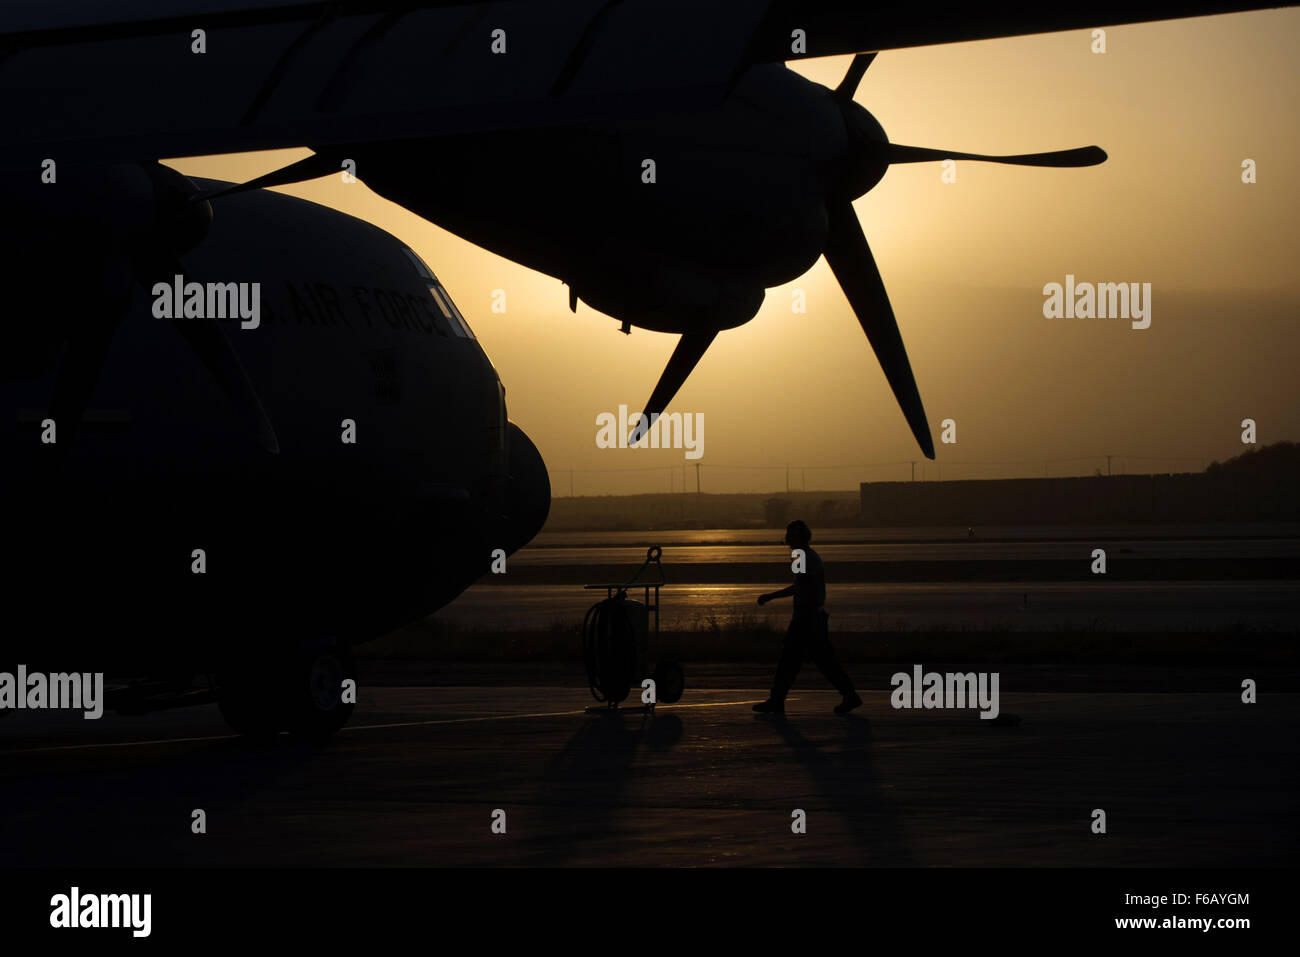 A U.S. Airman assigned to the 774th Expeditionary Airlift Squadron completes a preflight inspection on a C-130J Super Hercules aircraft at Bagram Air Field, Afghanistan, Sept. 12, 2015. The Airman and the rest of his squadron were in the process of redeploying back to Little Rock Air Force Base after successfully completing their deployment. During their rotation as the 774th Expeditionary Airlift Squadron, the Little Rock team completed 1,850 combat sorties and moved 14,500 passengers and 17 million pounds of cargo.  (U.S. Air Force photo by Tech. Sgt. Joseph Swafford/Released) Stock Photo